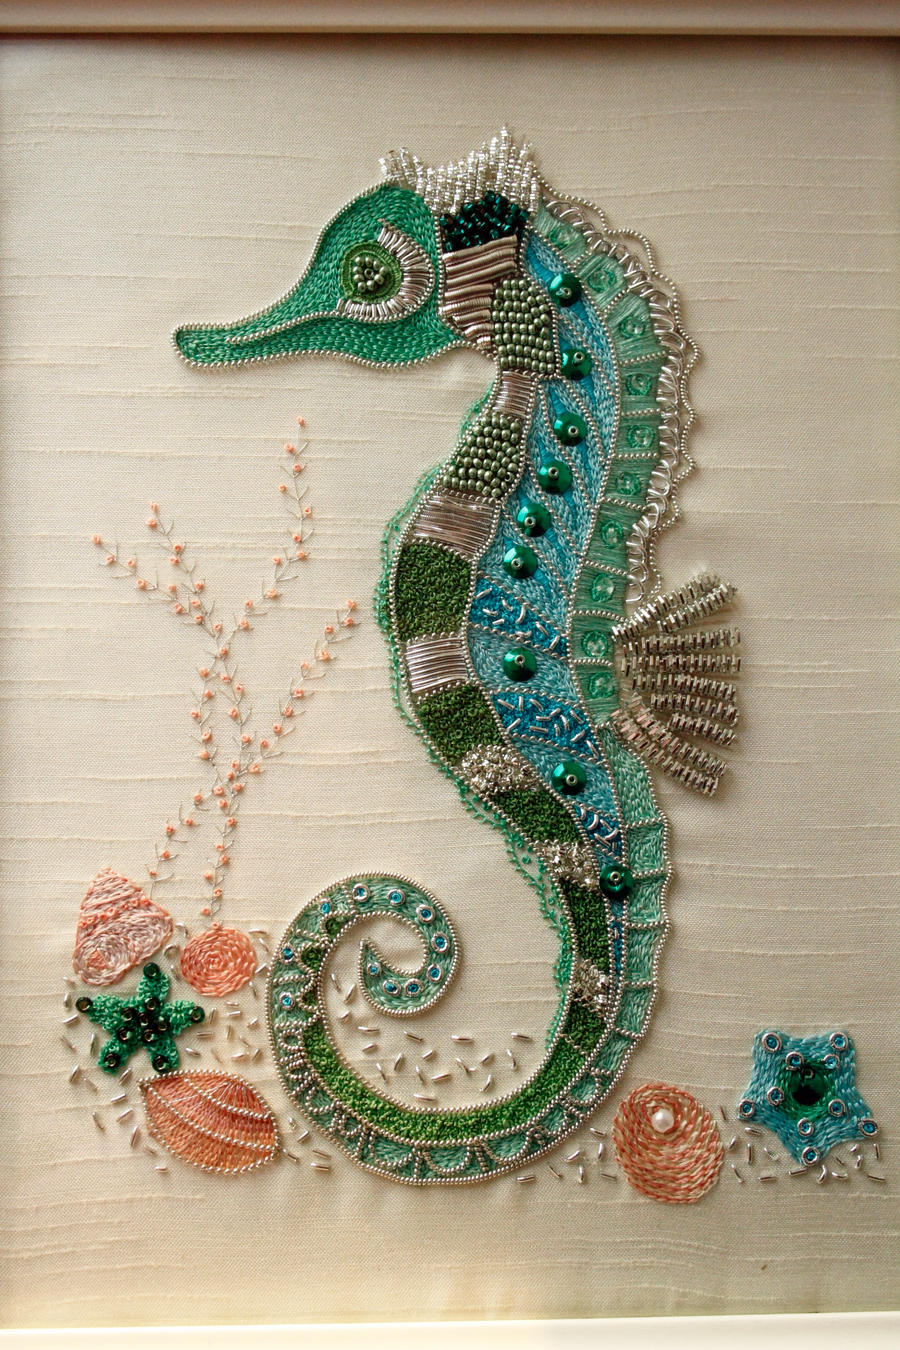 Seahorse embroidery